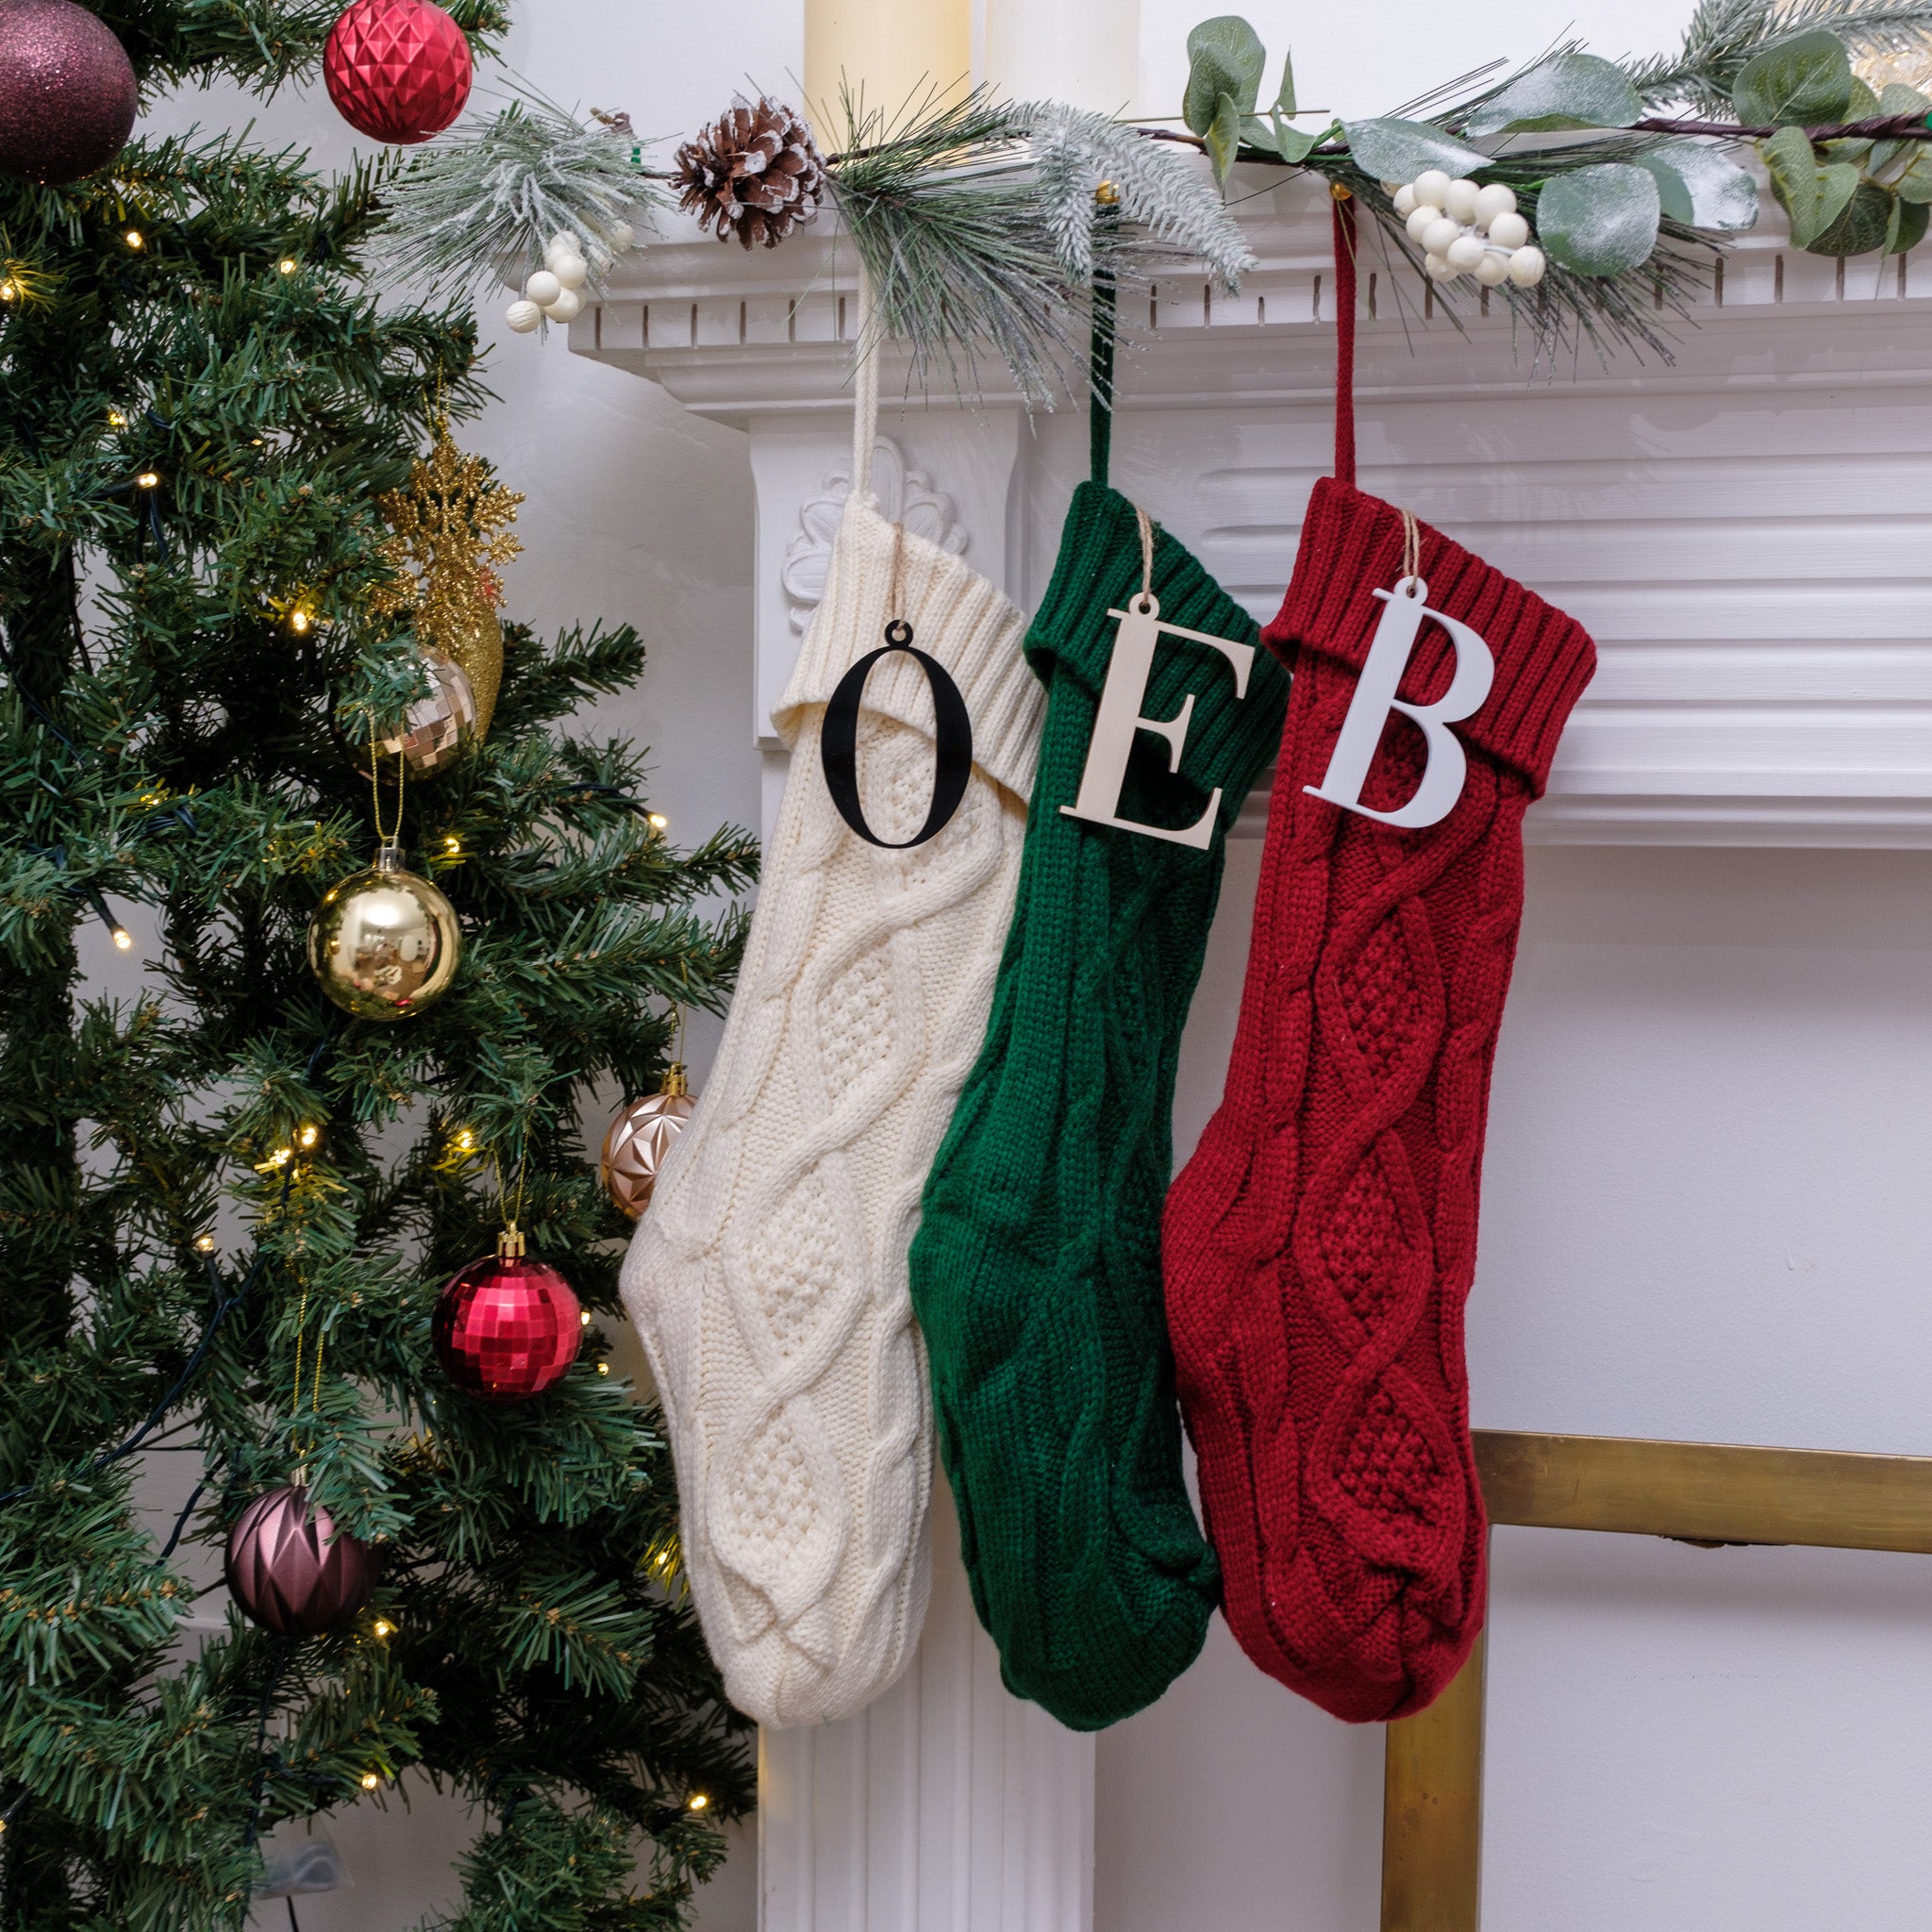 Personalised knitted stocking